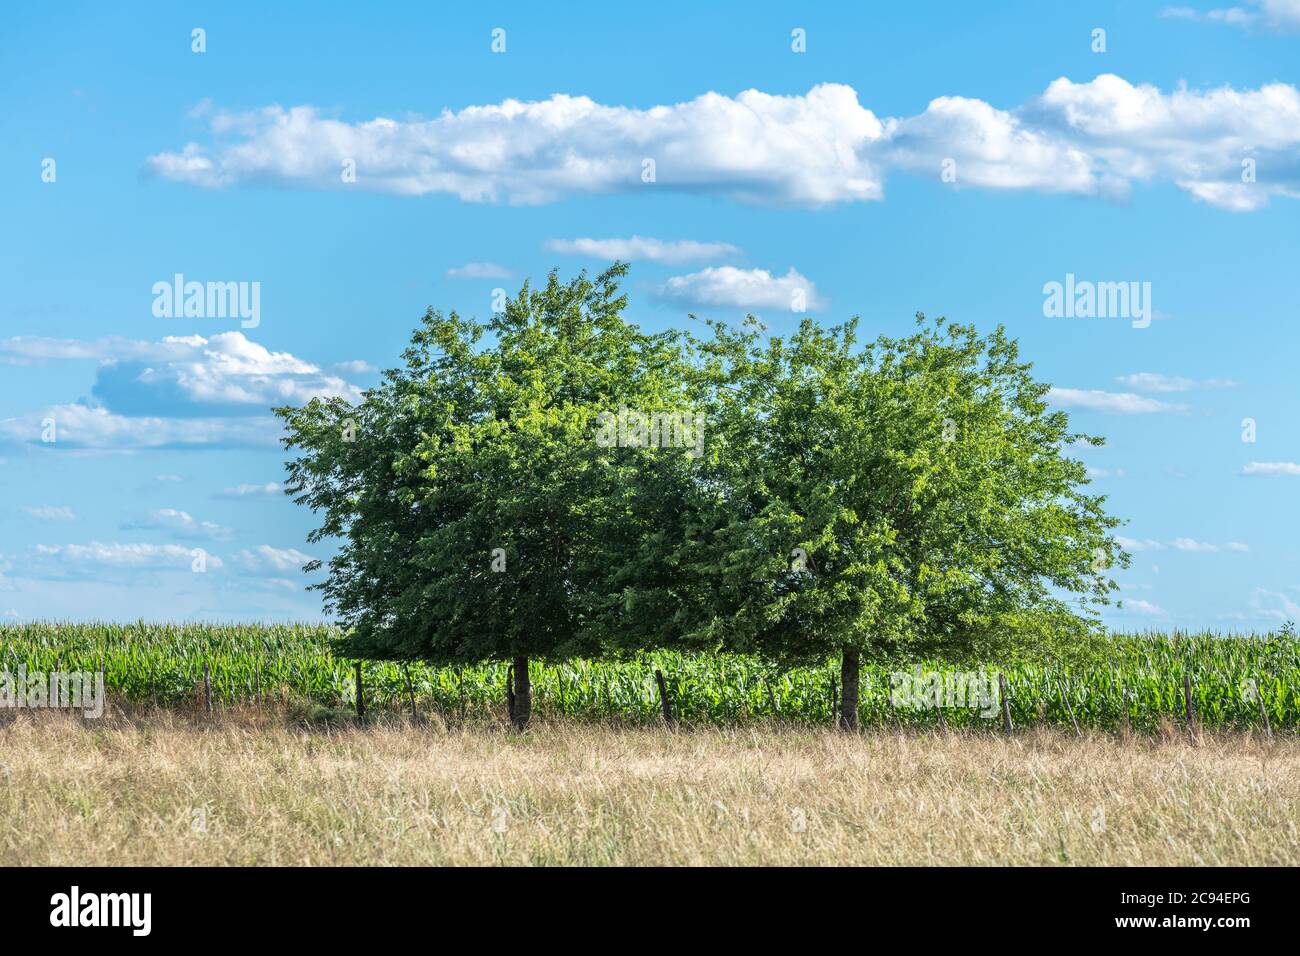 Two trees line the edge of a corn crop in a rural region of the Midwest during a bright, sunny day. Stock Photo